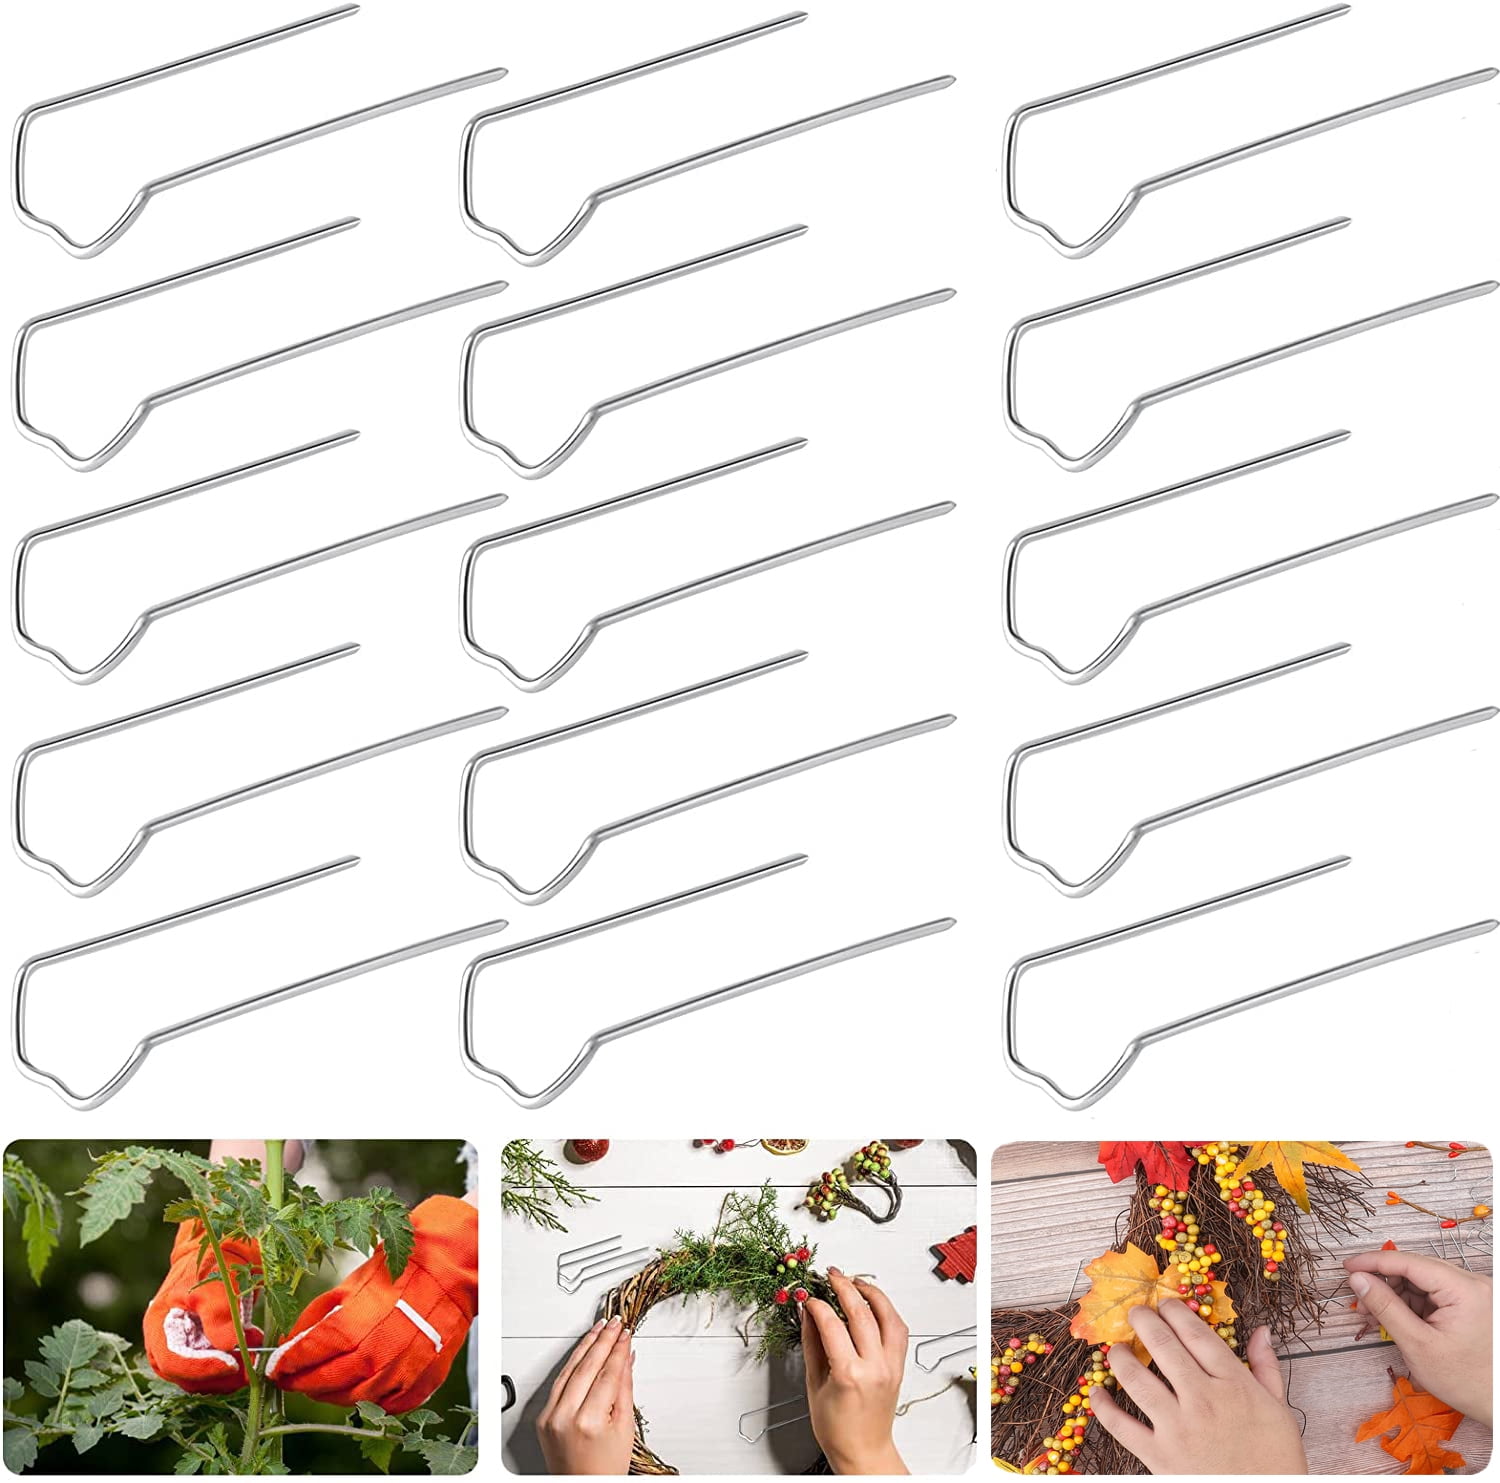 2 Inch Greening Pins (600 Pieces) - Floral Fern Pins for Straw Wreaths  Holiday Arrangements & Craft Projects. Bulk Buy Quantities Available for  Wholesale Prices. 600 Pins